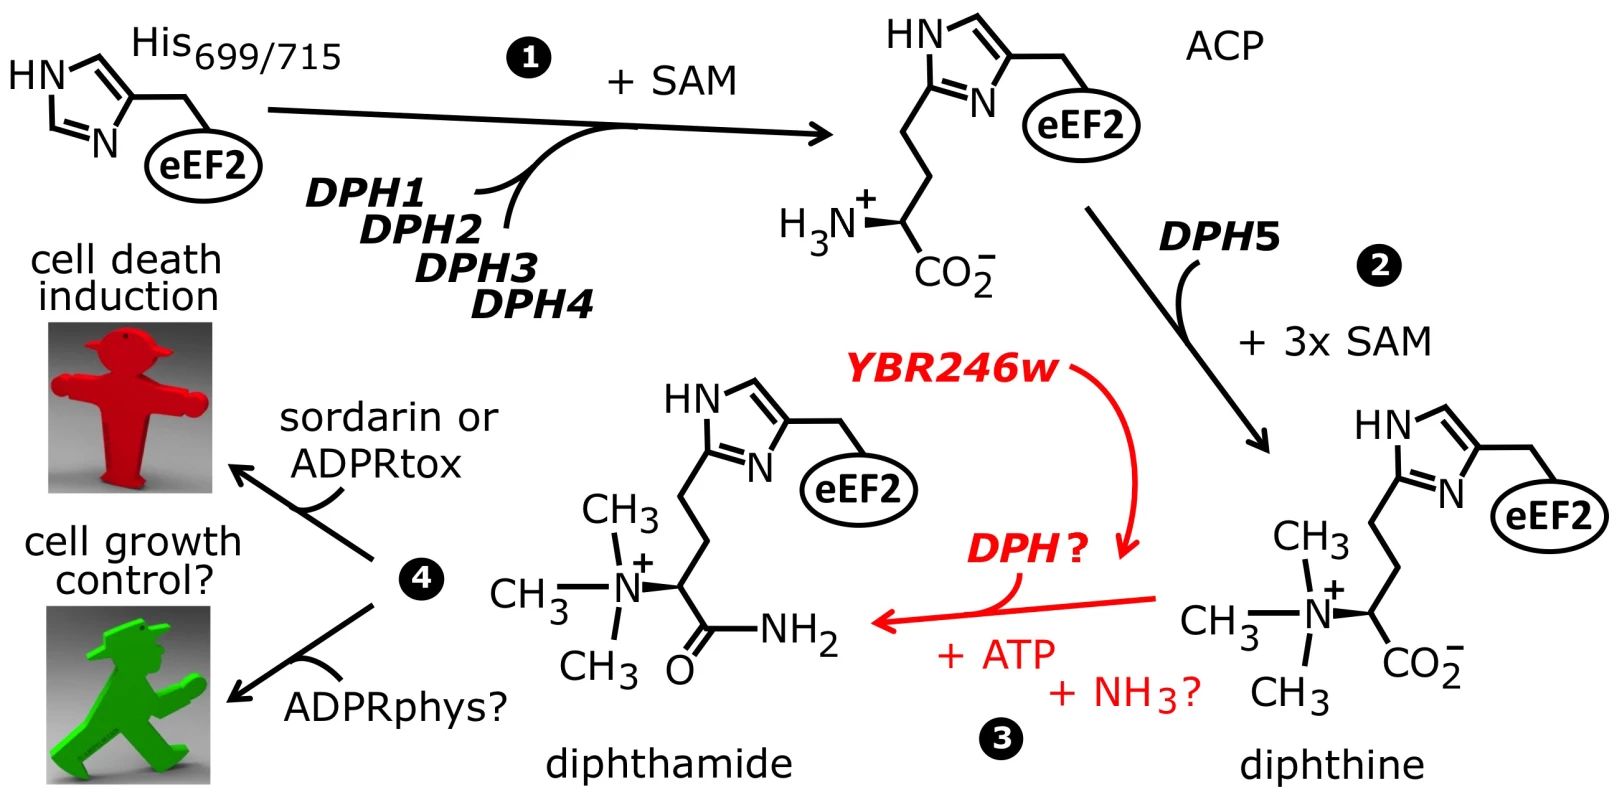 The biosynthetic pathway for modification of eEF2 by diphthamide.